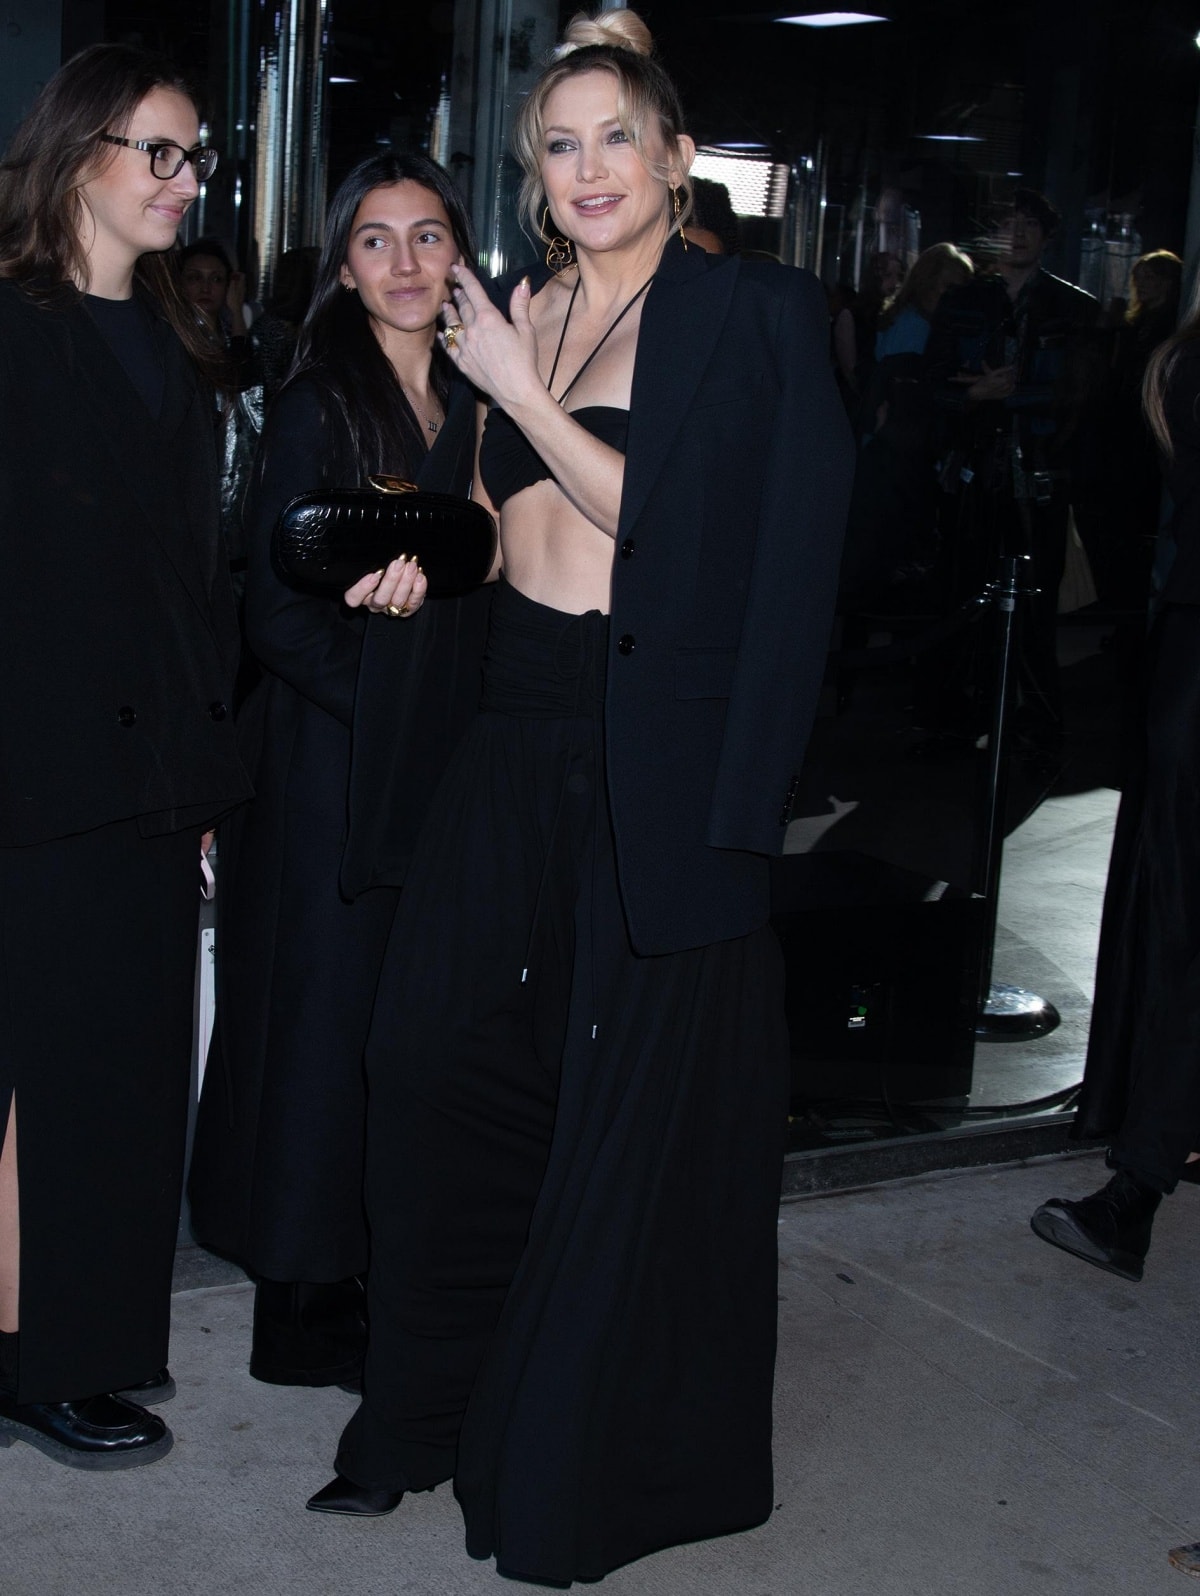 Kate Hudson turning heads in a sultry all-black ensemble at the Michael Kors Fall/Winter 2023 show during New York Fashion Week